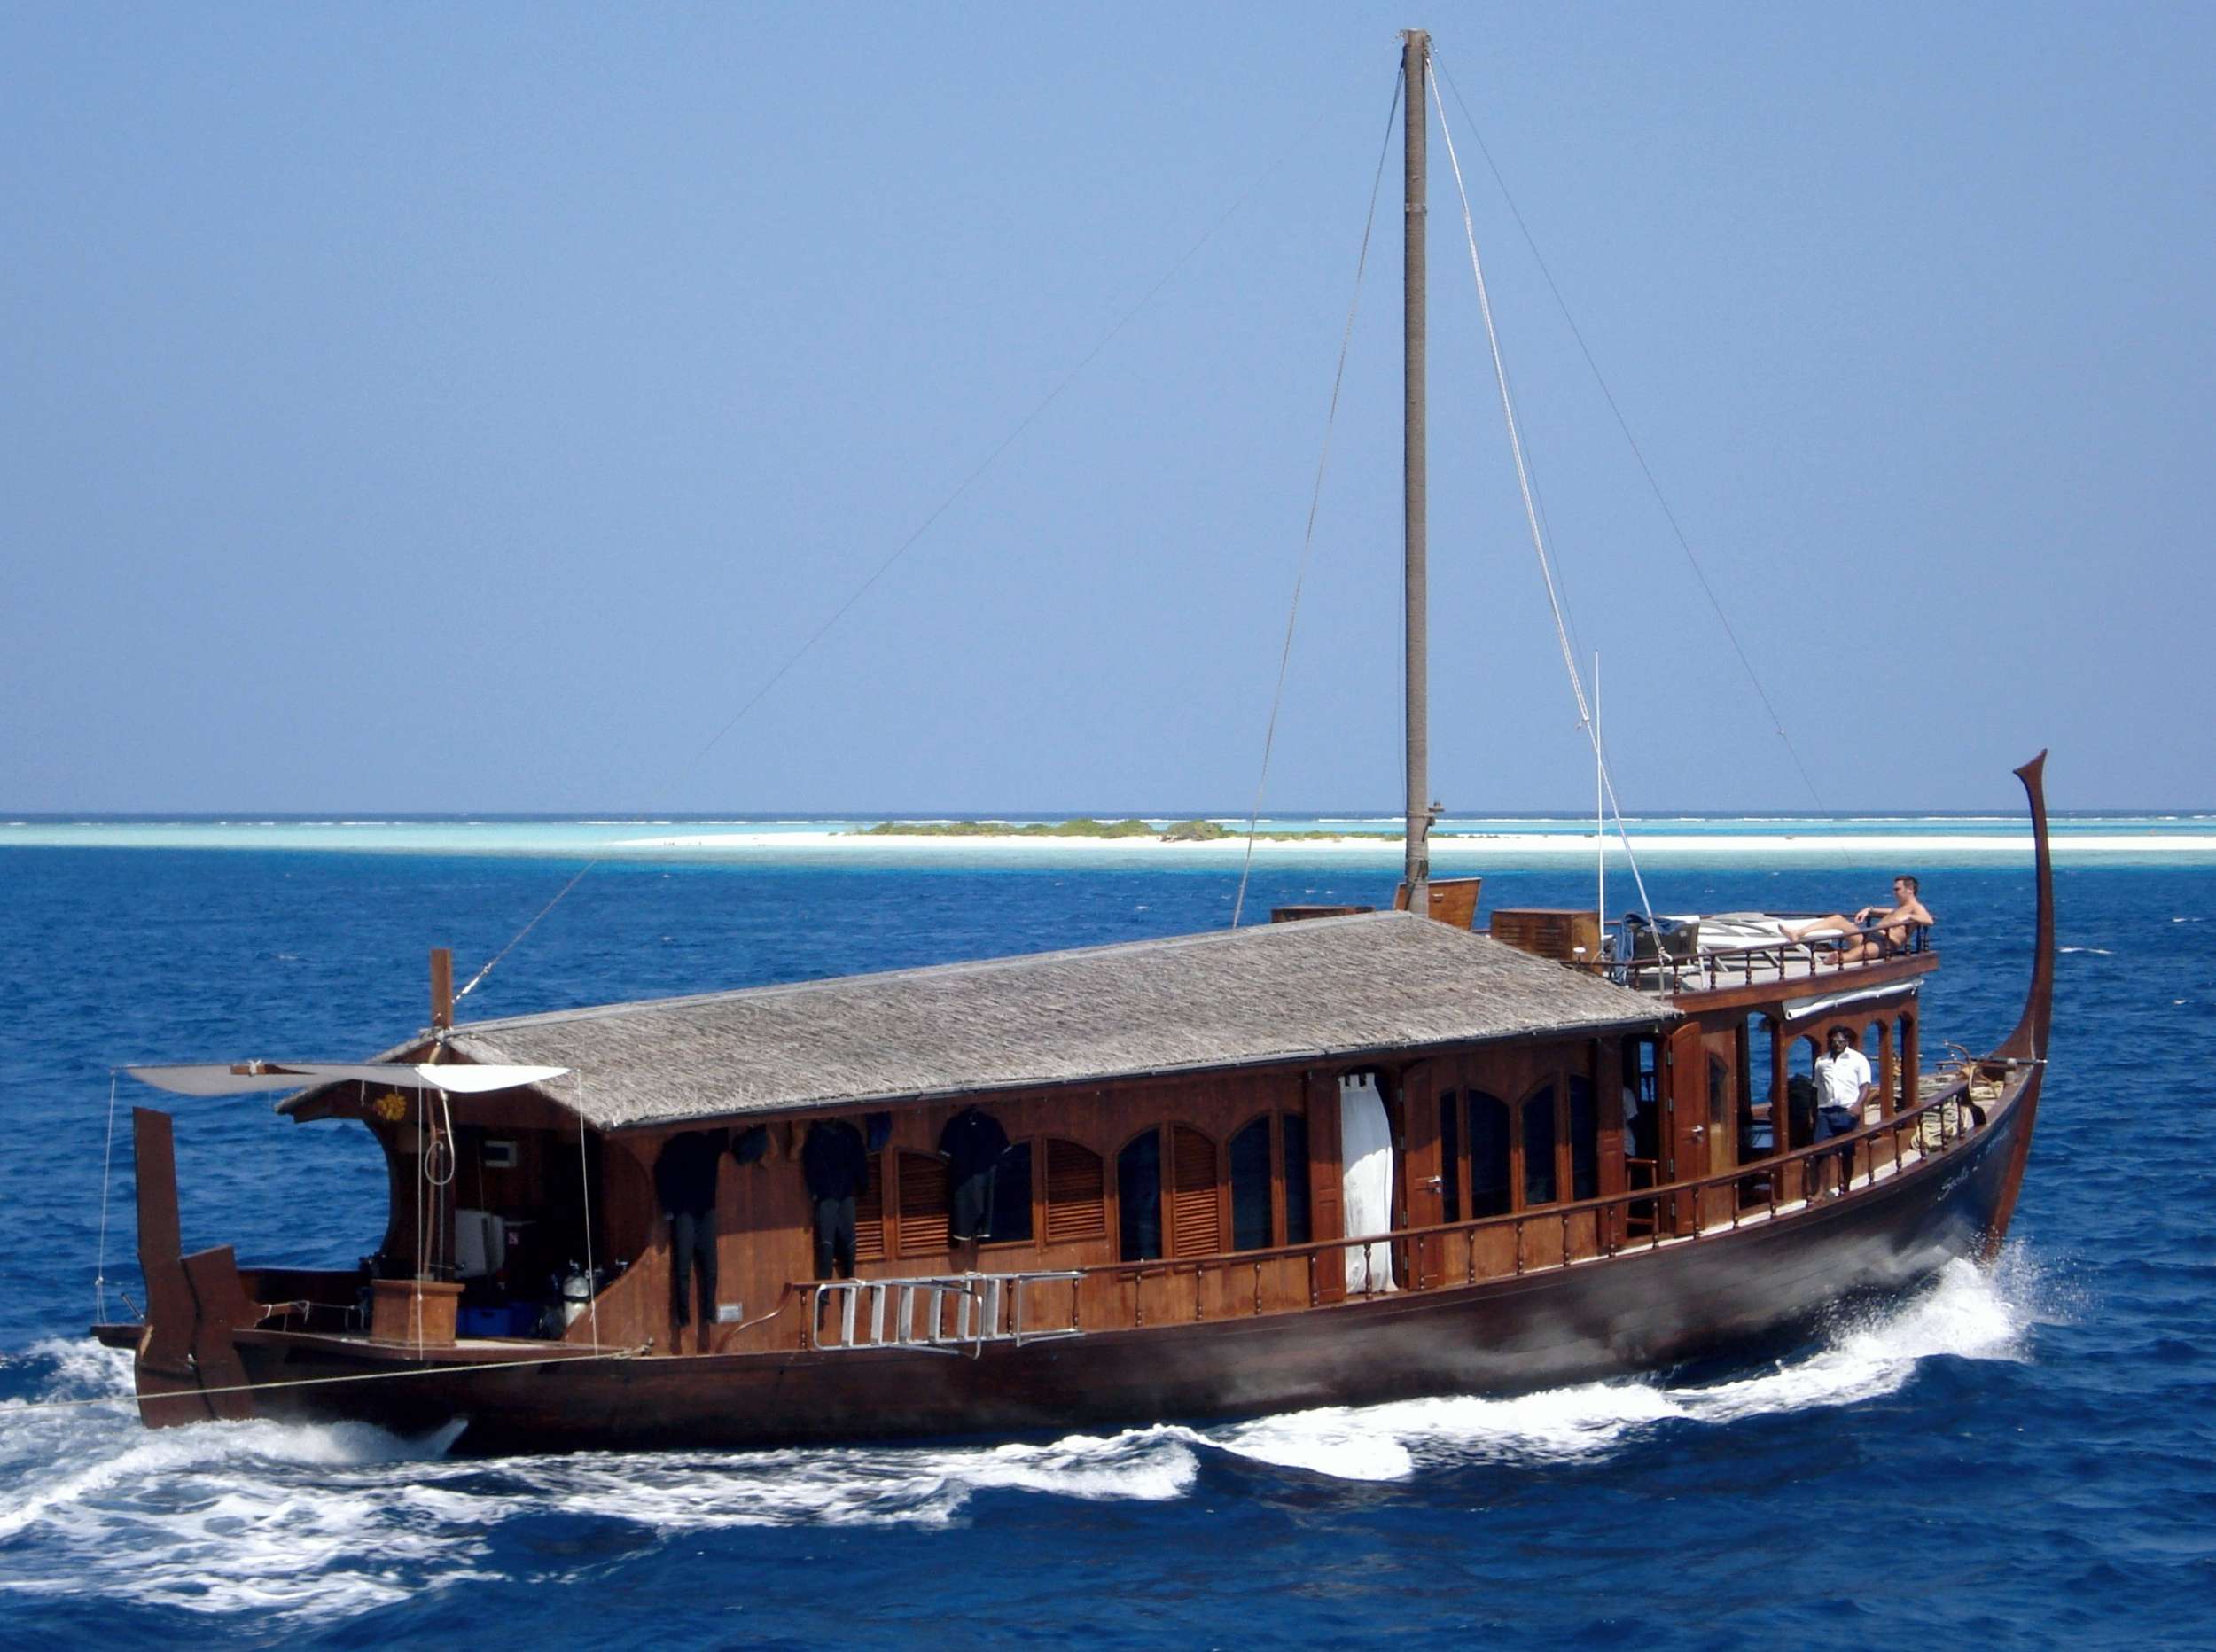 DHONI STELLA 2 - Yacht Charter Malaysia & Boat hire in Indian Ocean & SE Asia 1